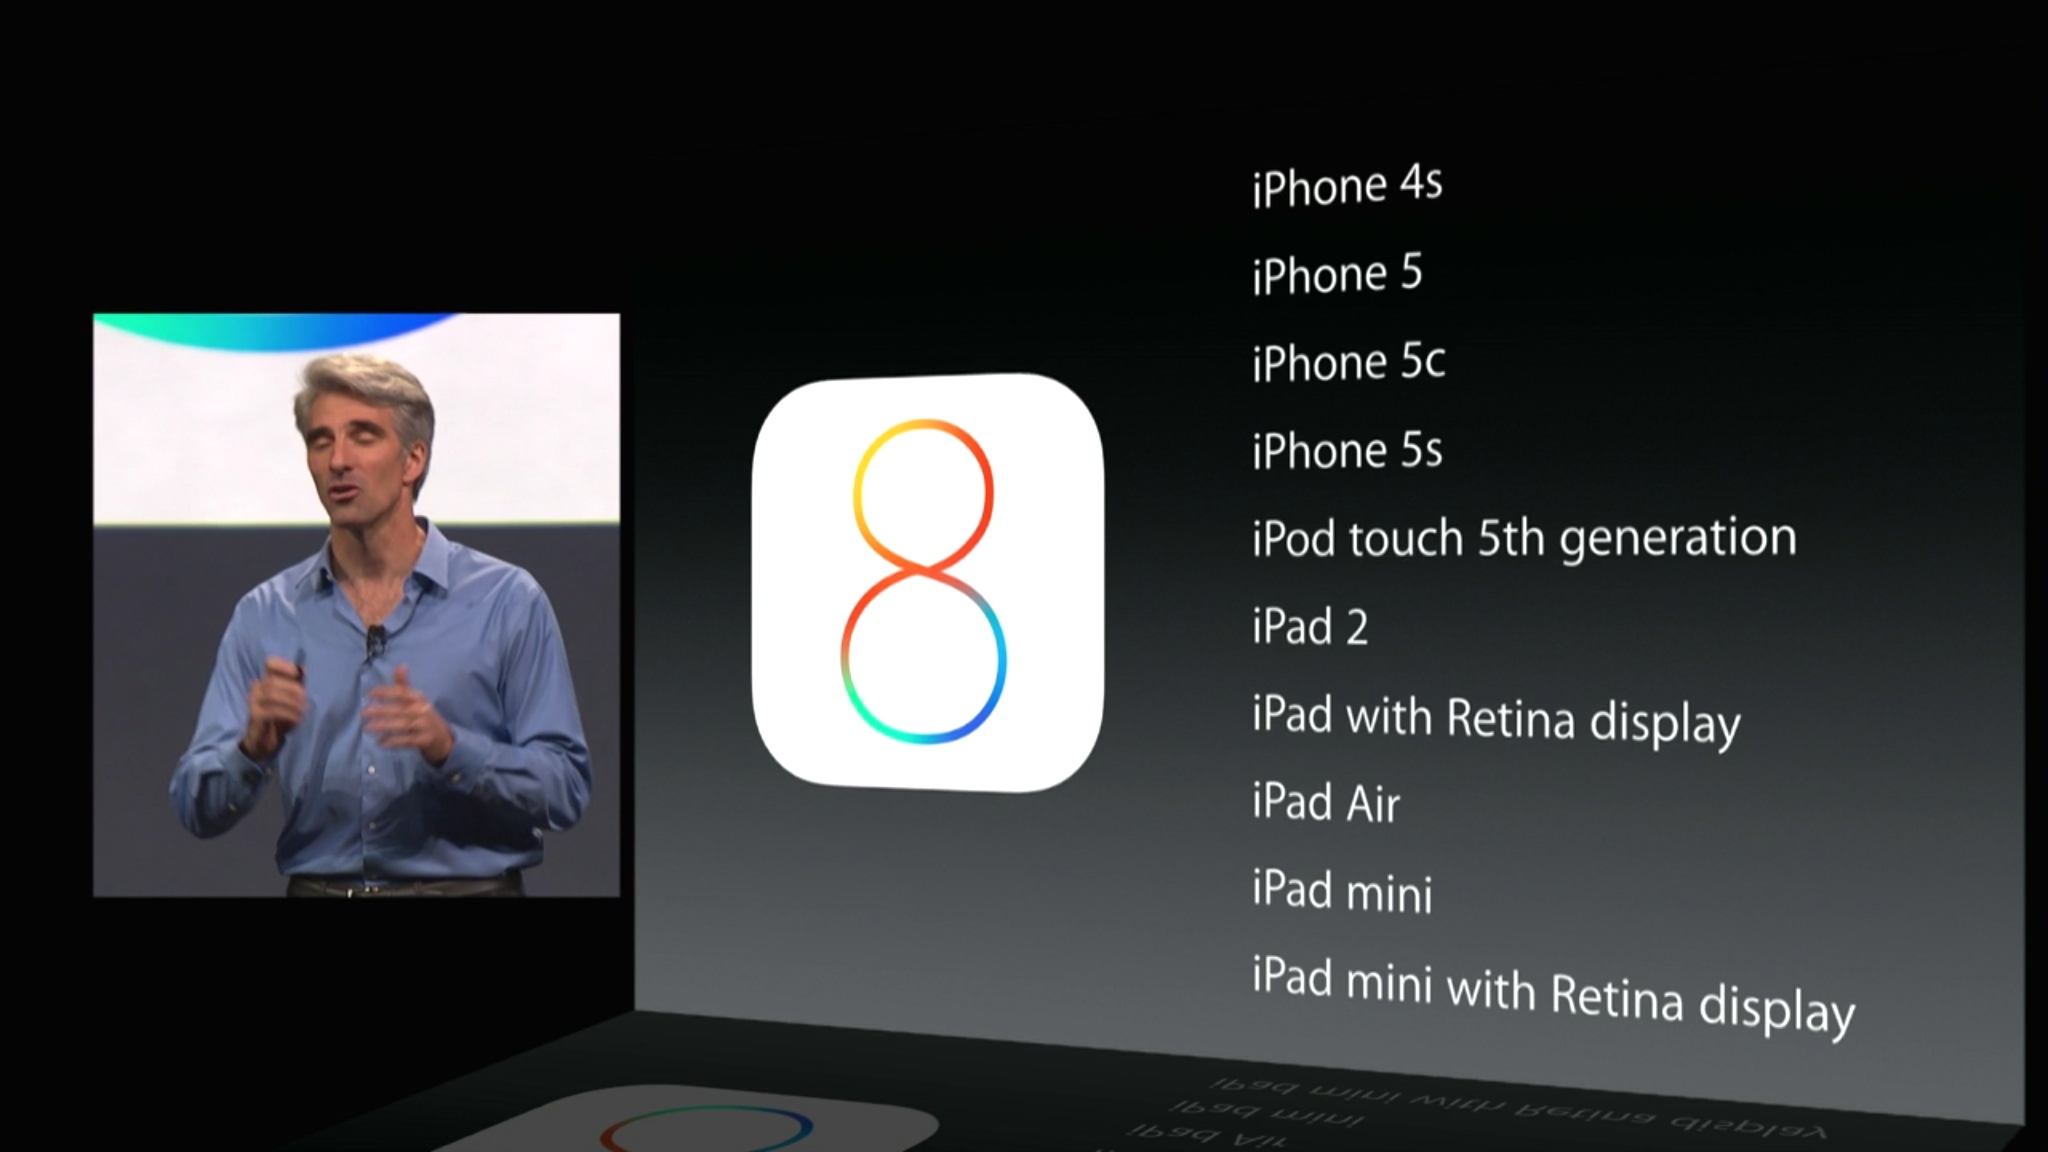 iOS 8 Beta Devices Support